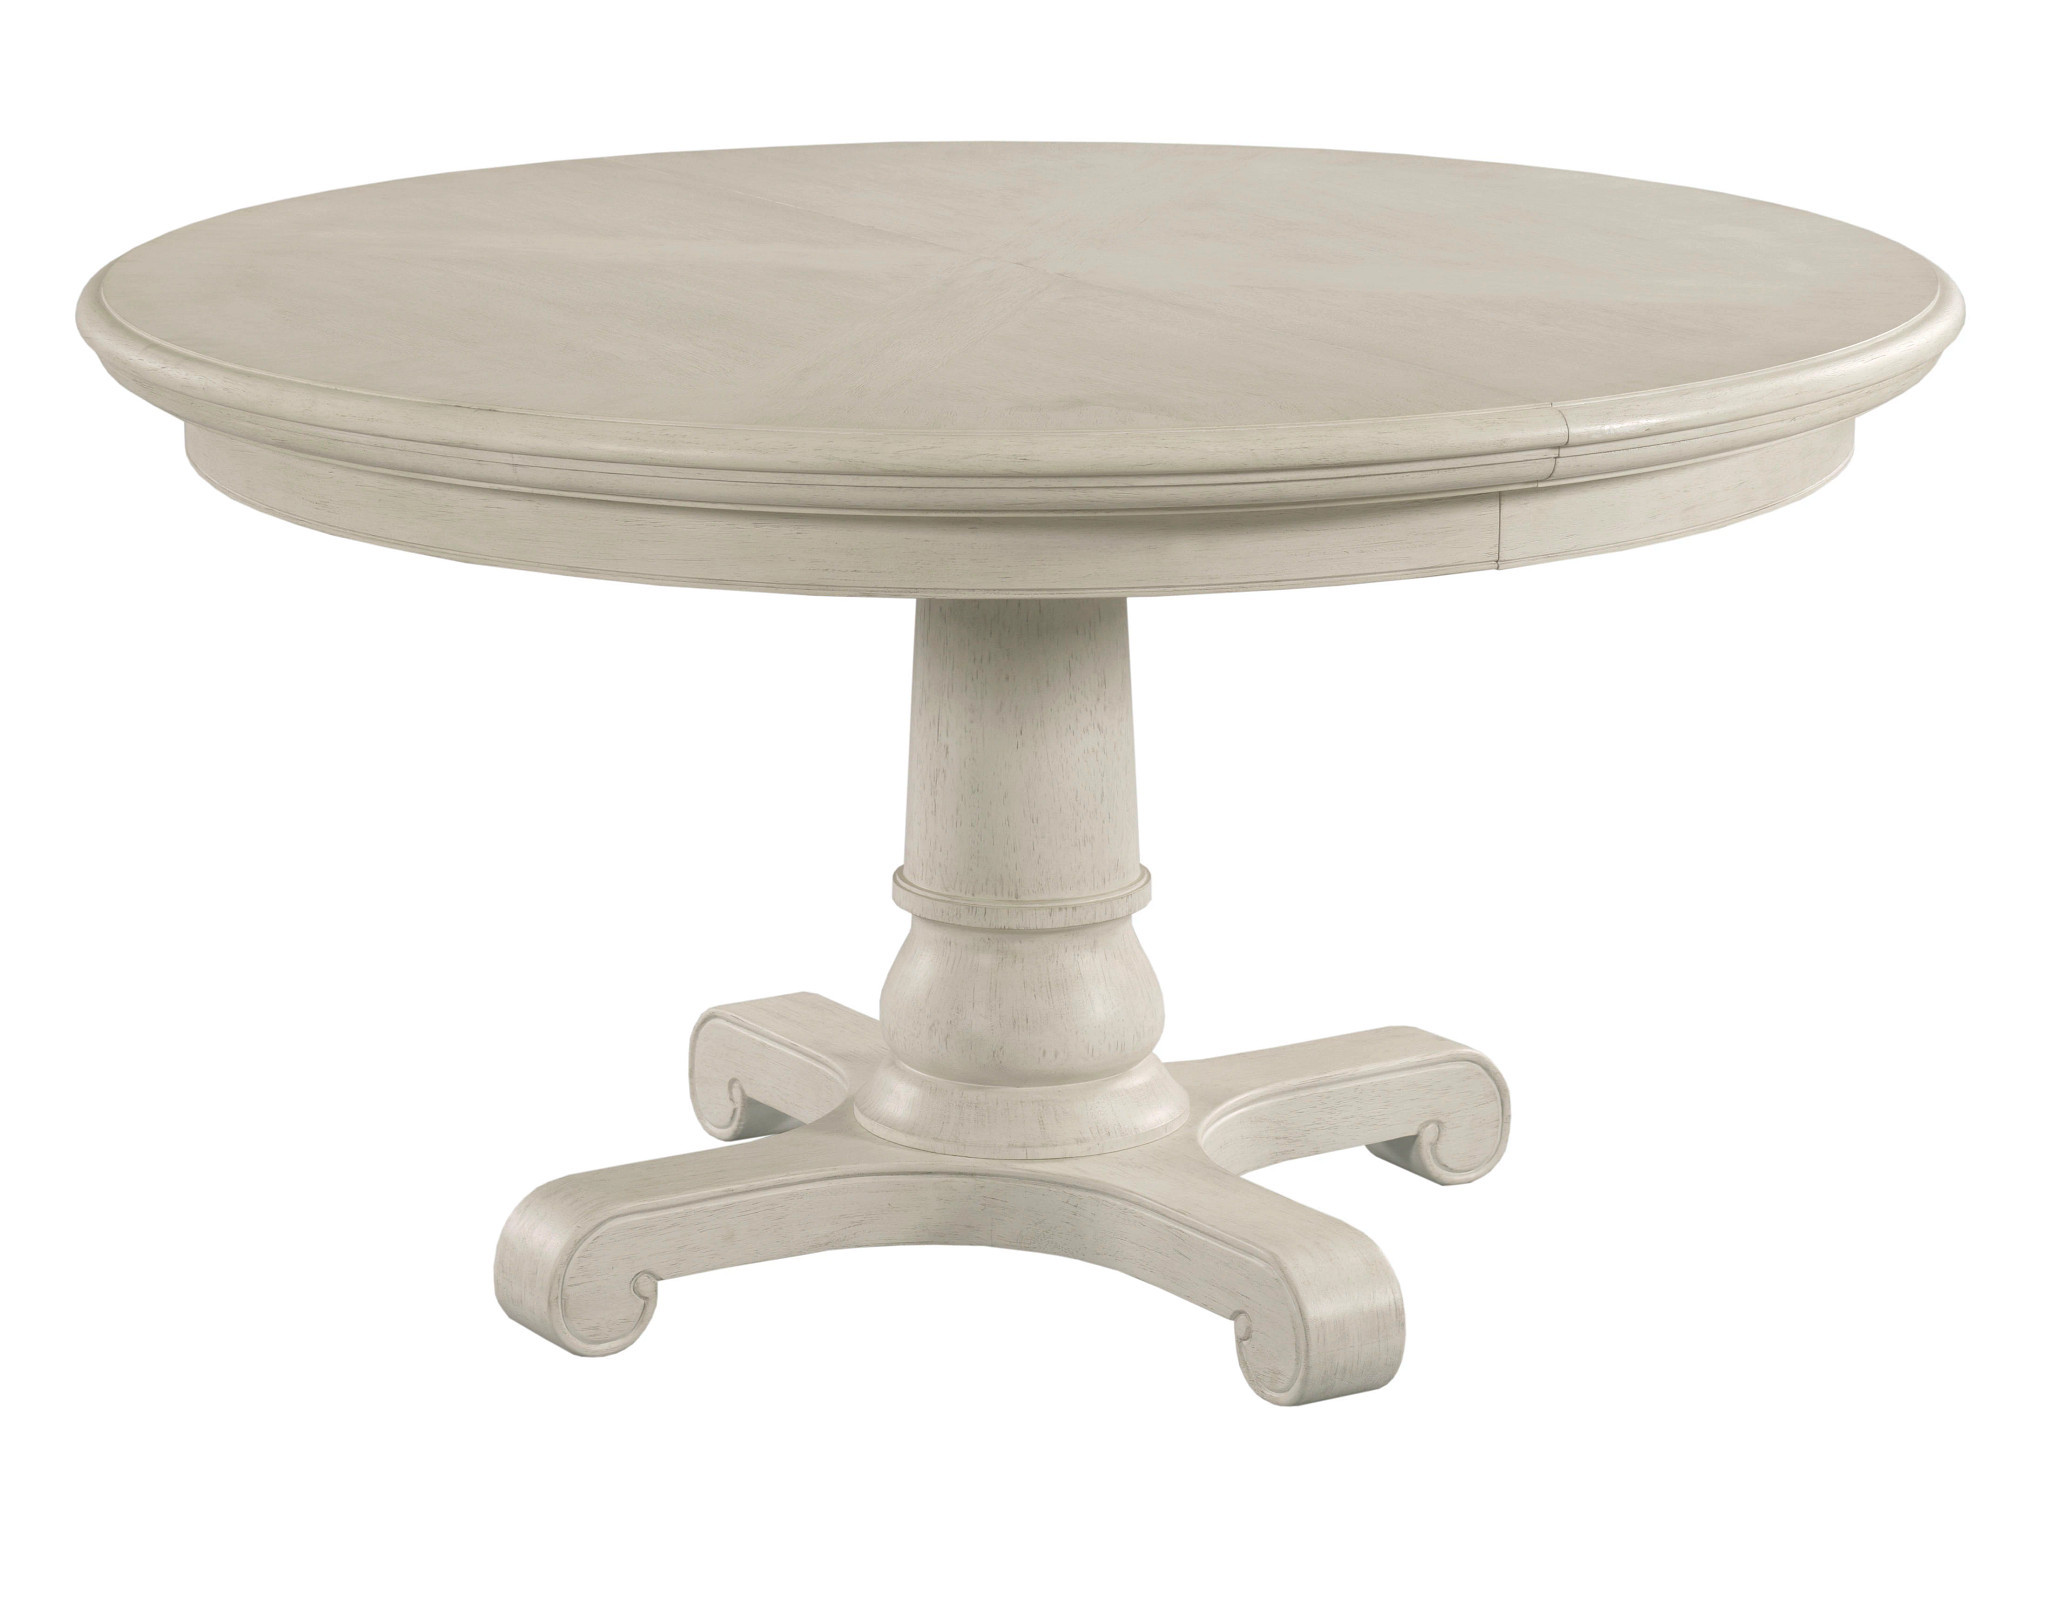 Caswell Round Dining Table w/ one 20 inch leaf